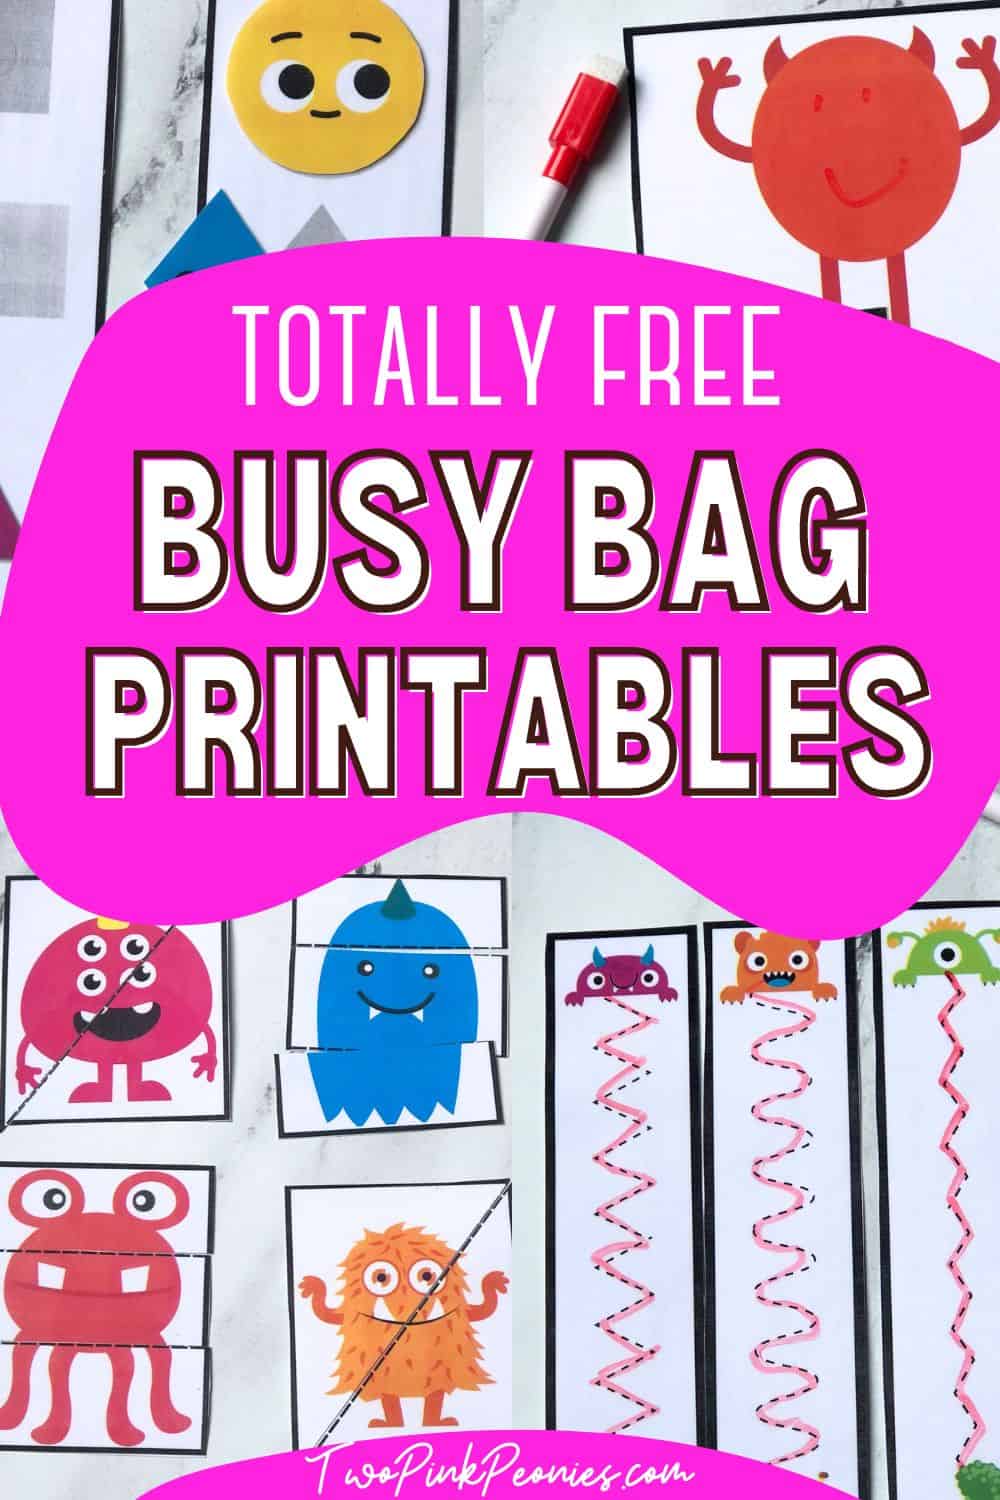 Text that says, "Totally free busy bag printables." Around the text are photos of the monster themed busy bag printables.